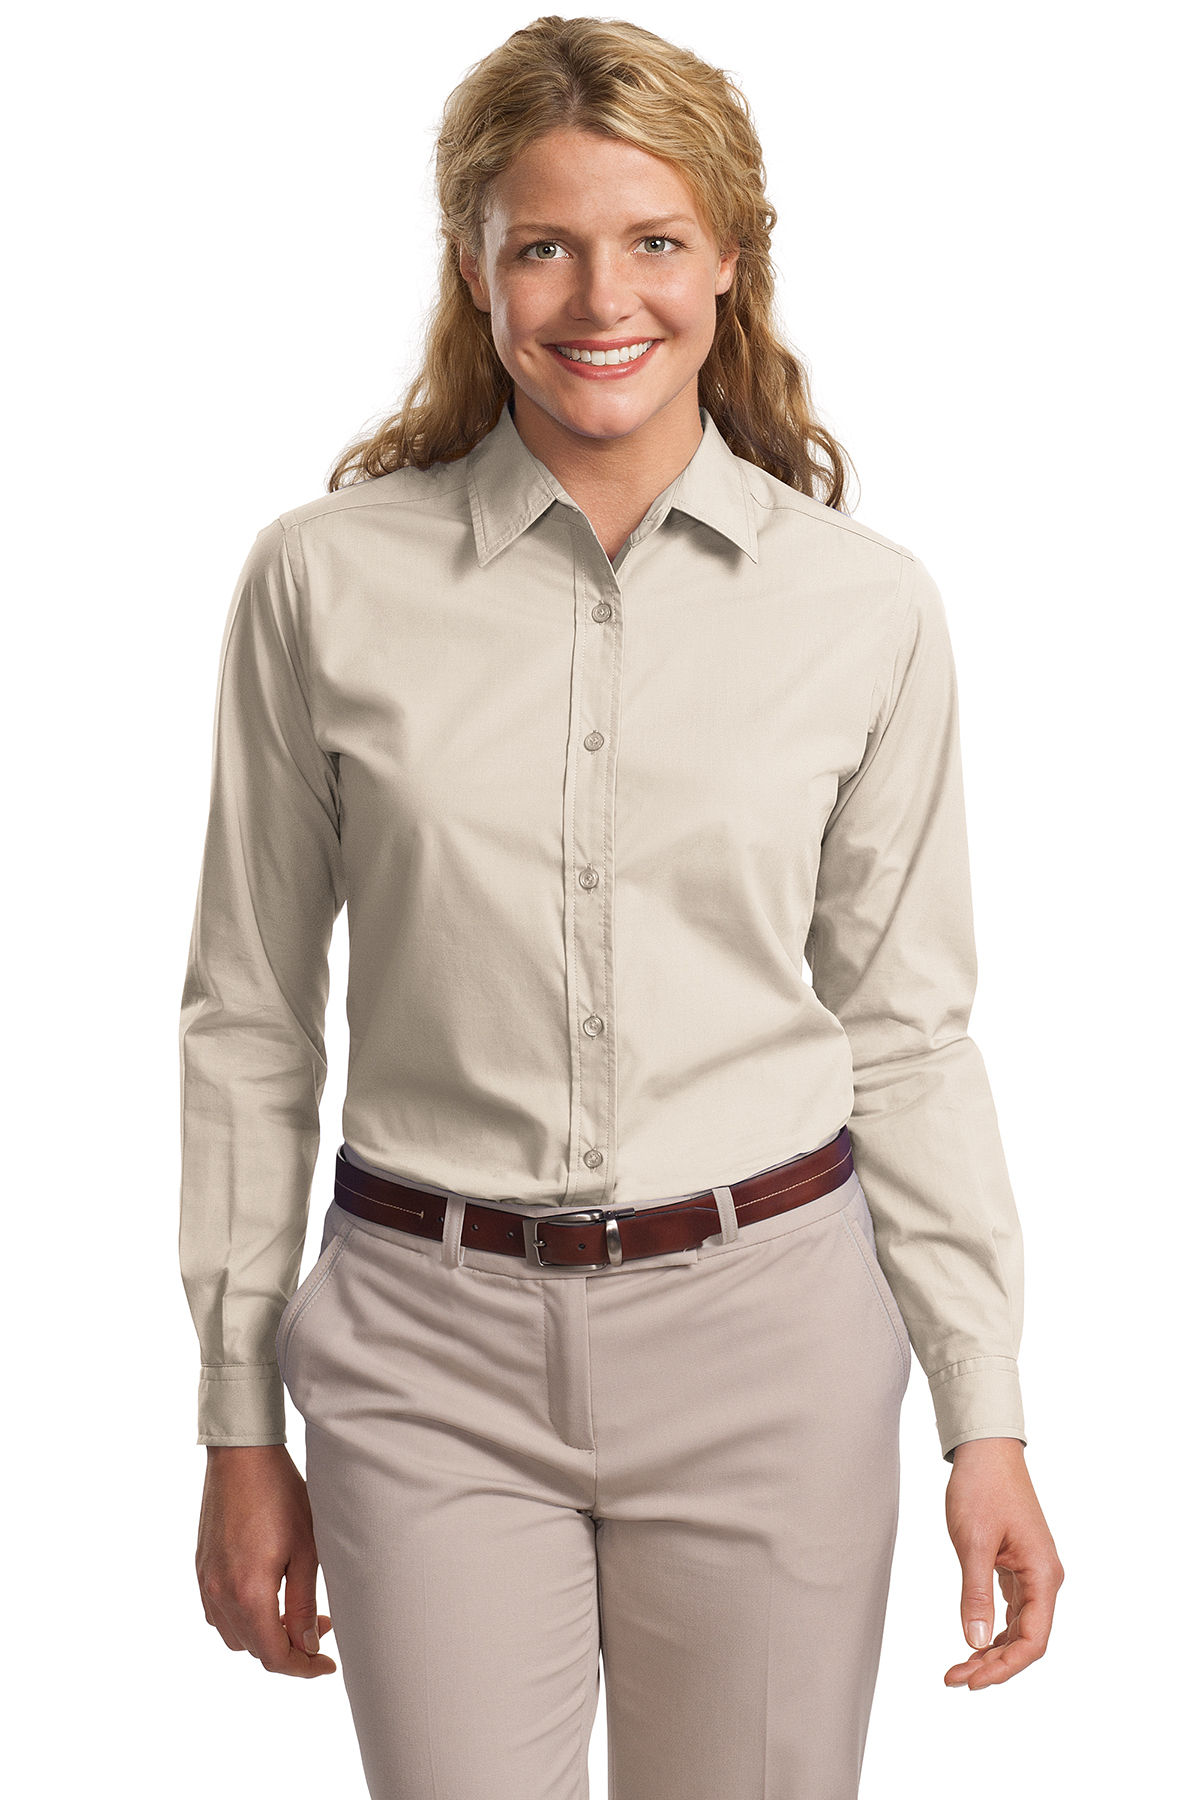 Port Authority Ladies Long Sleeve Easy Care, Soil Resistant Shirt ...